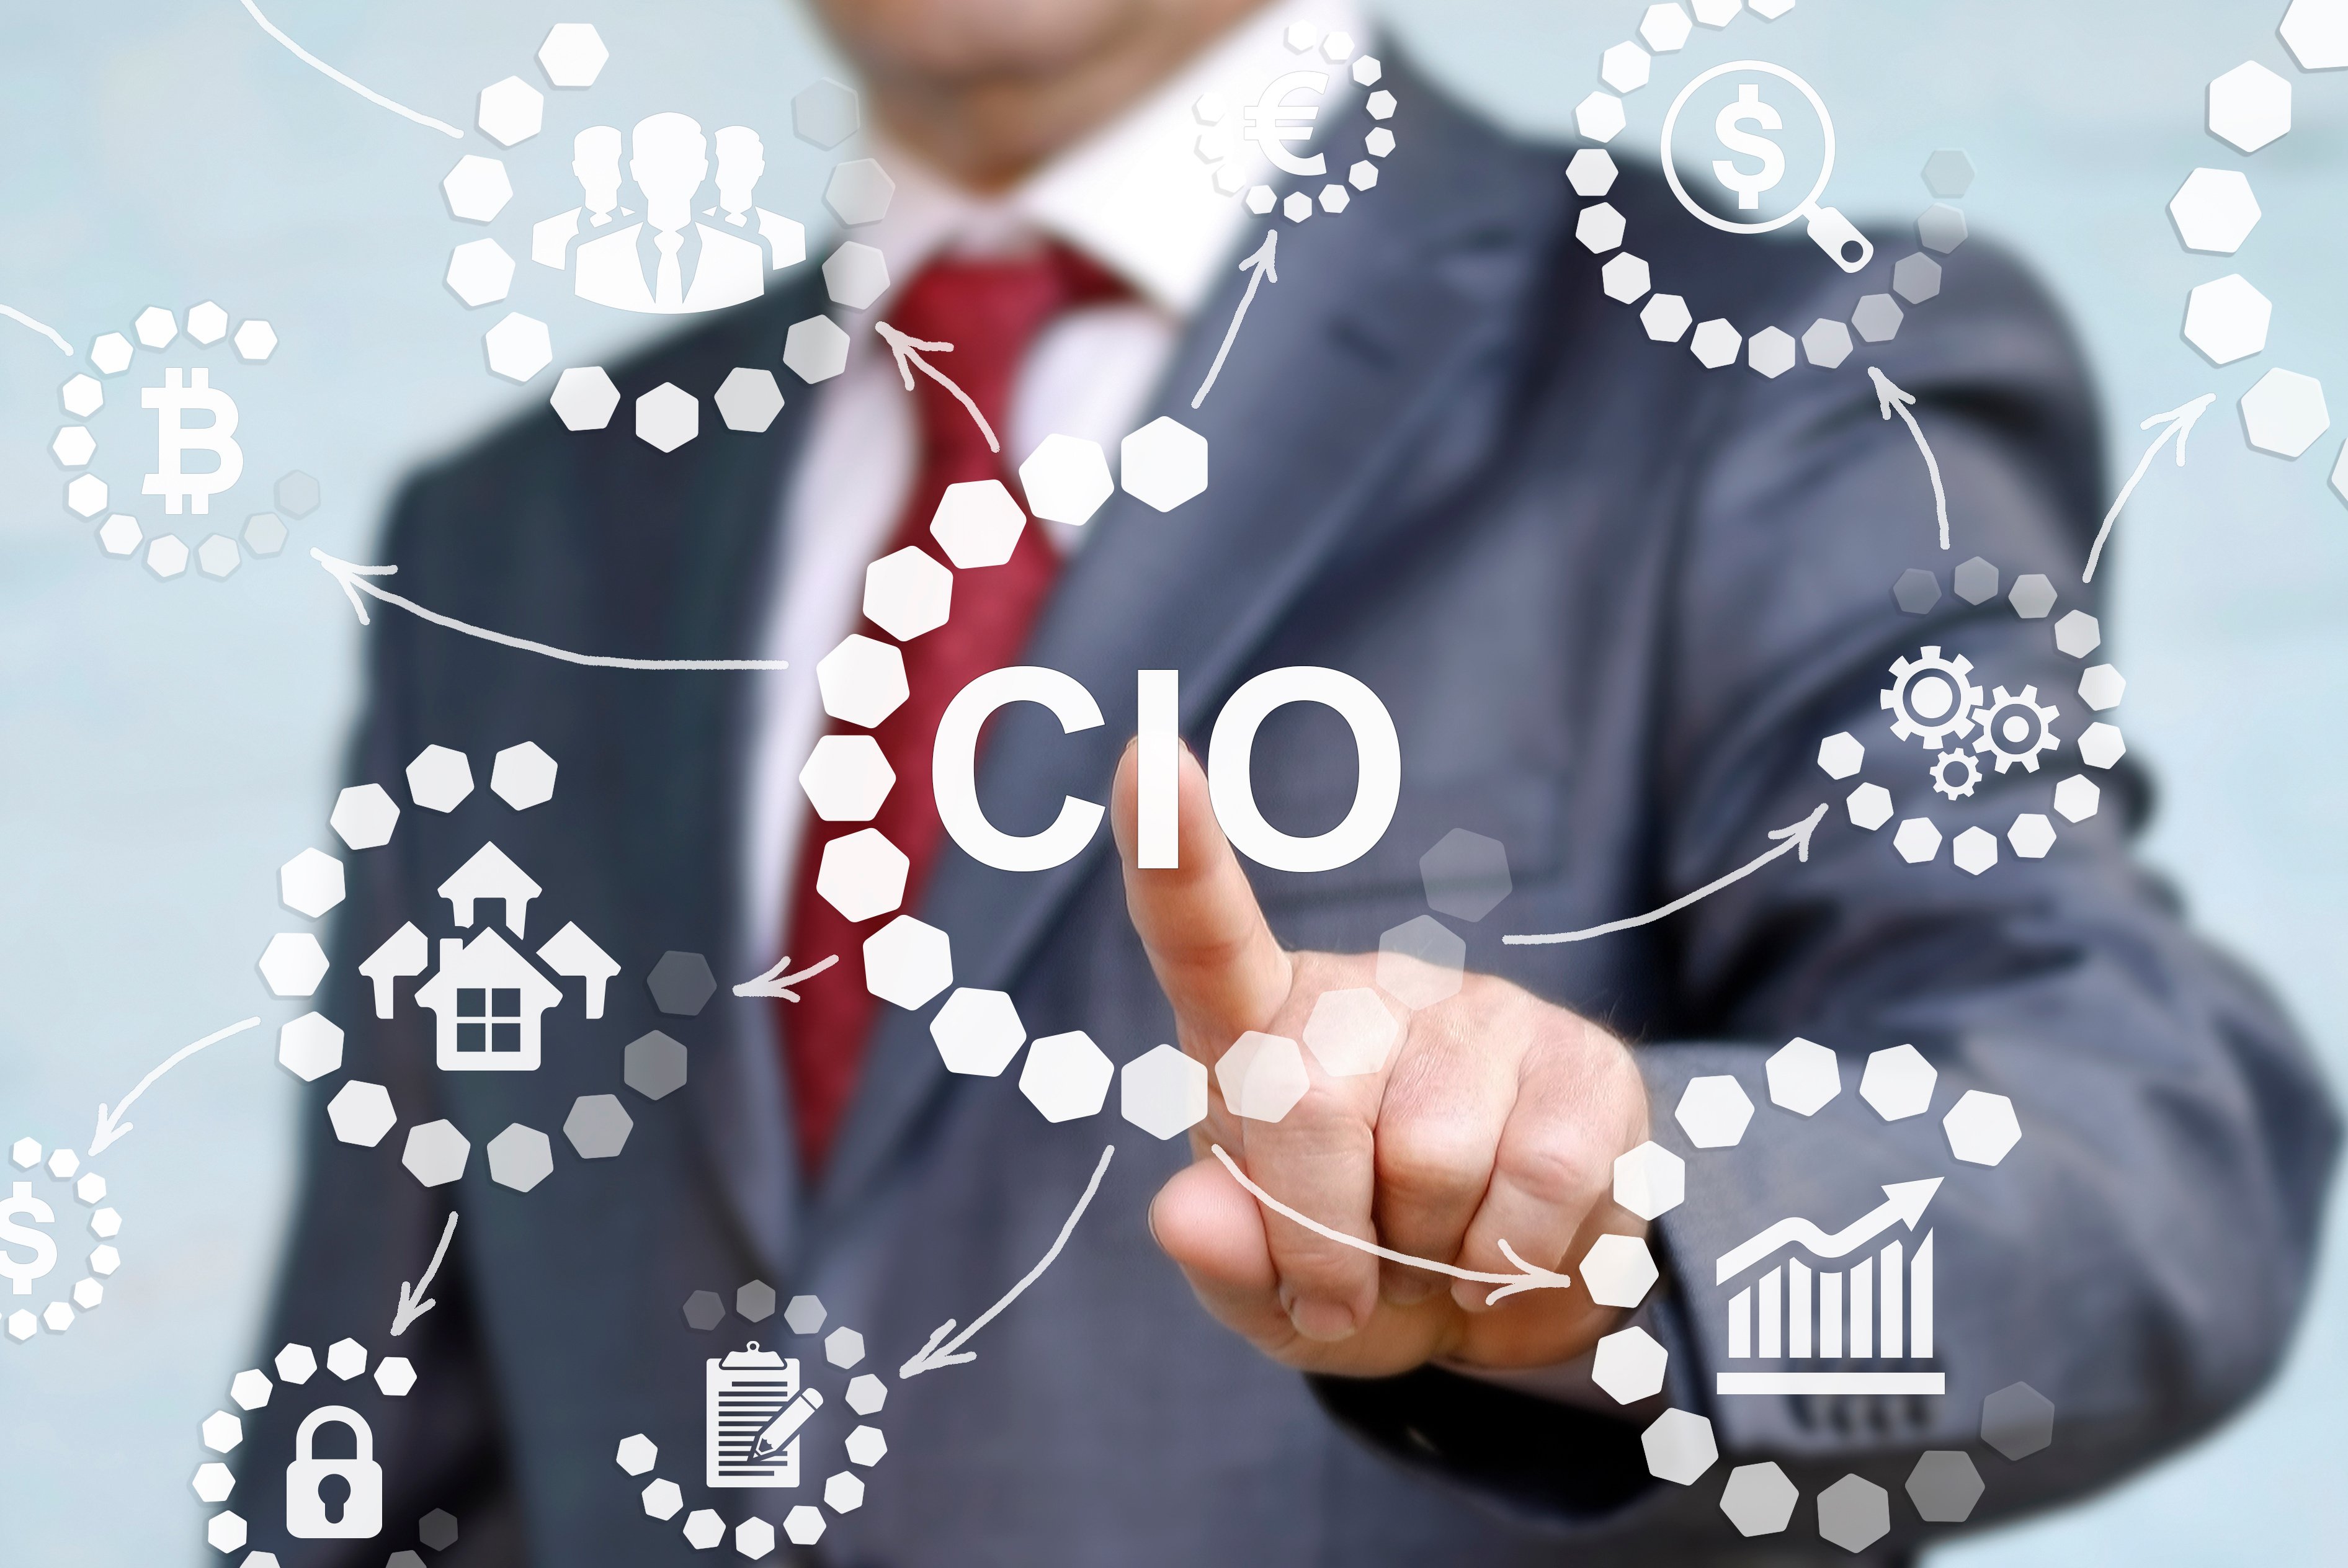 chief information officer (CIO) with illustrations of different aspects of the CIO. role.